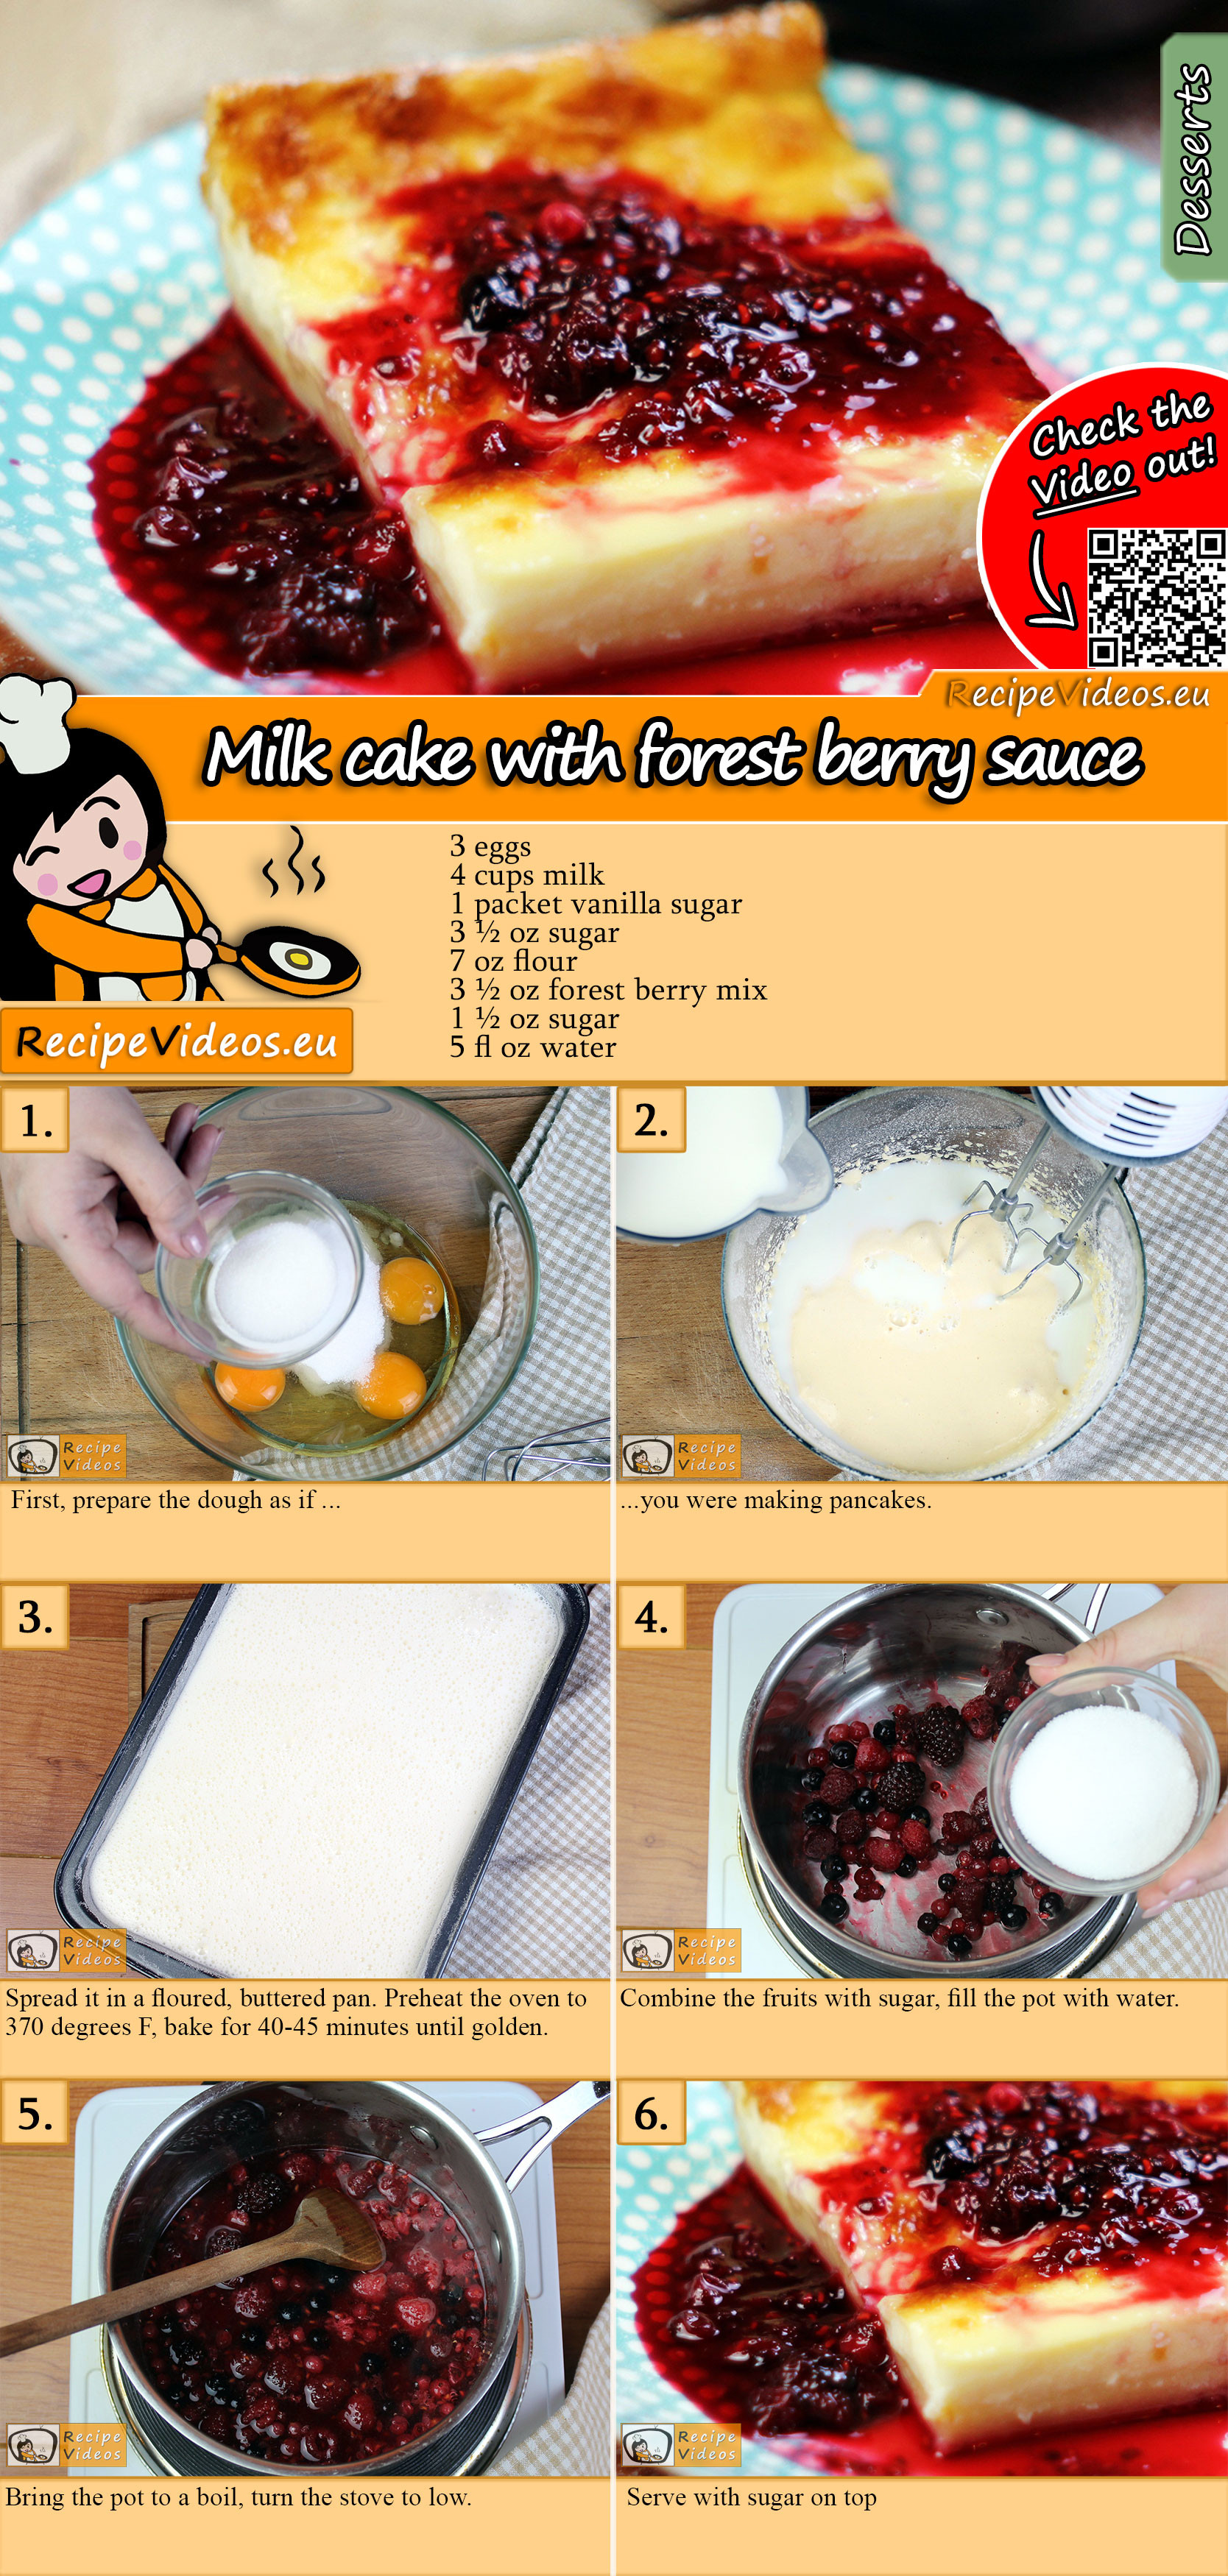 Milk cake with forest berry sauce recipe with video